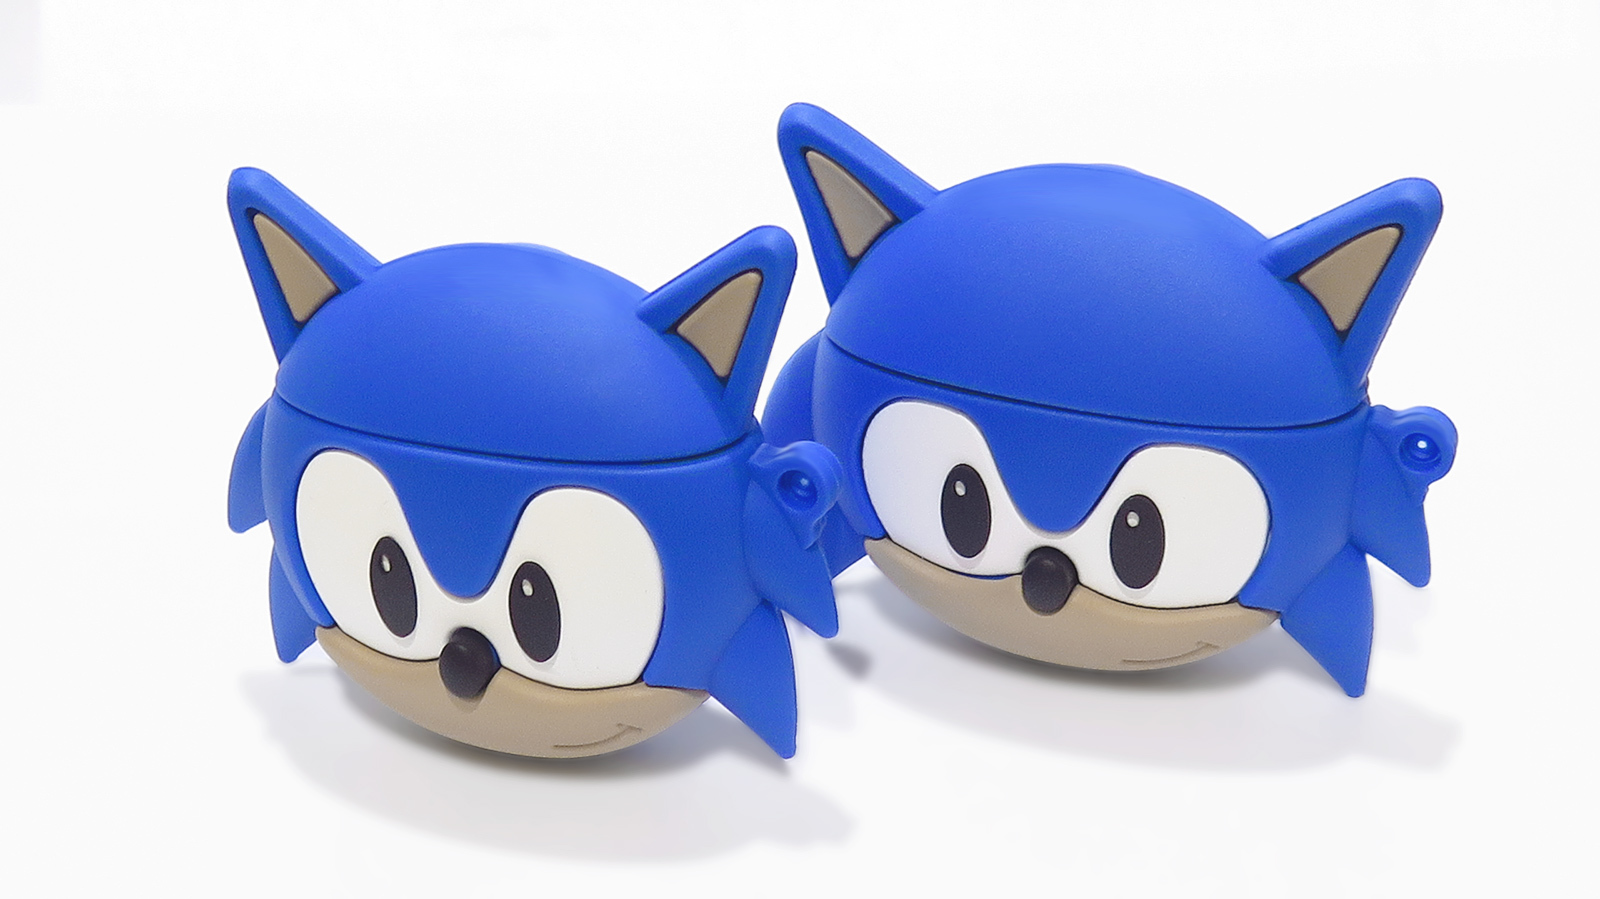 Fun Novelty Sonic Hedgehog Silicone Protective Case for AirPod 2nd Gen or Pro